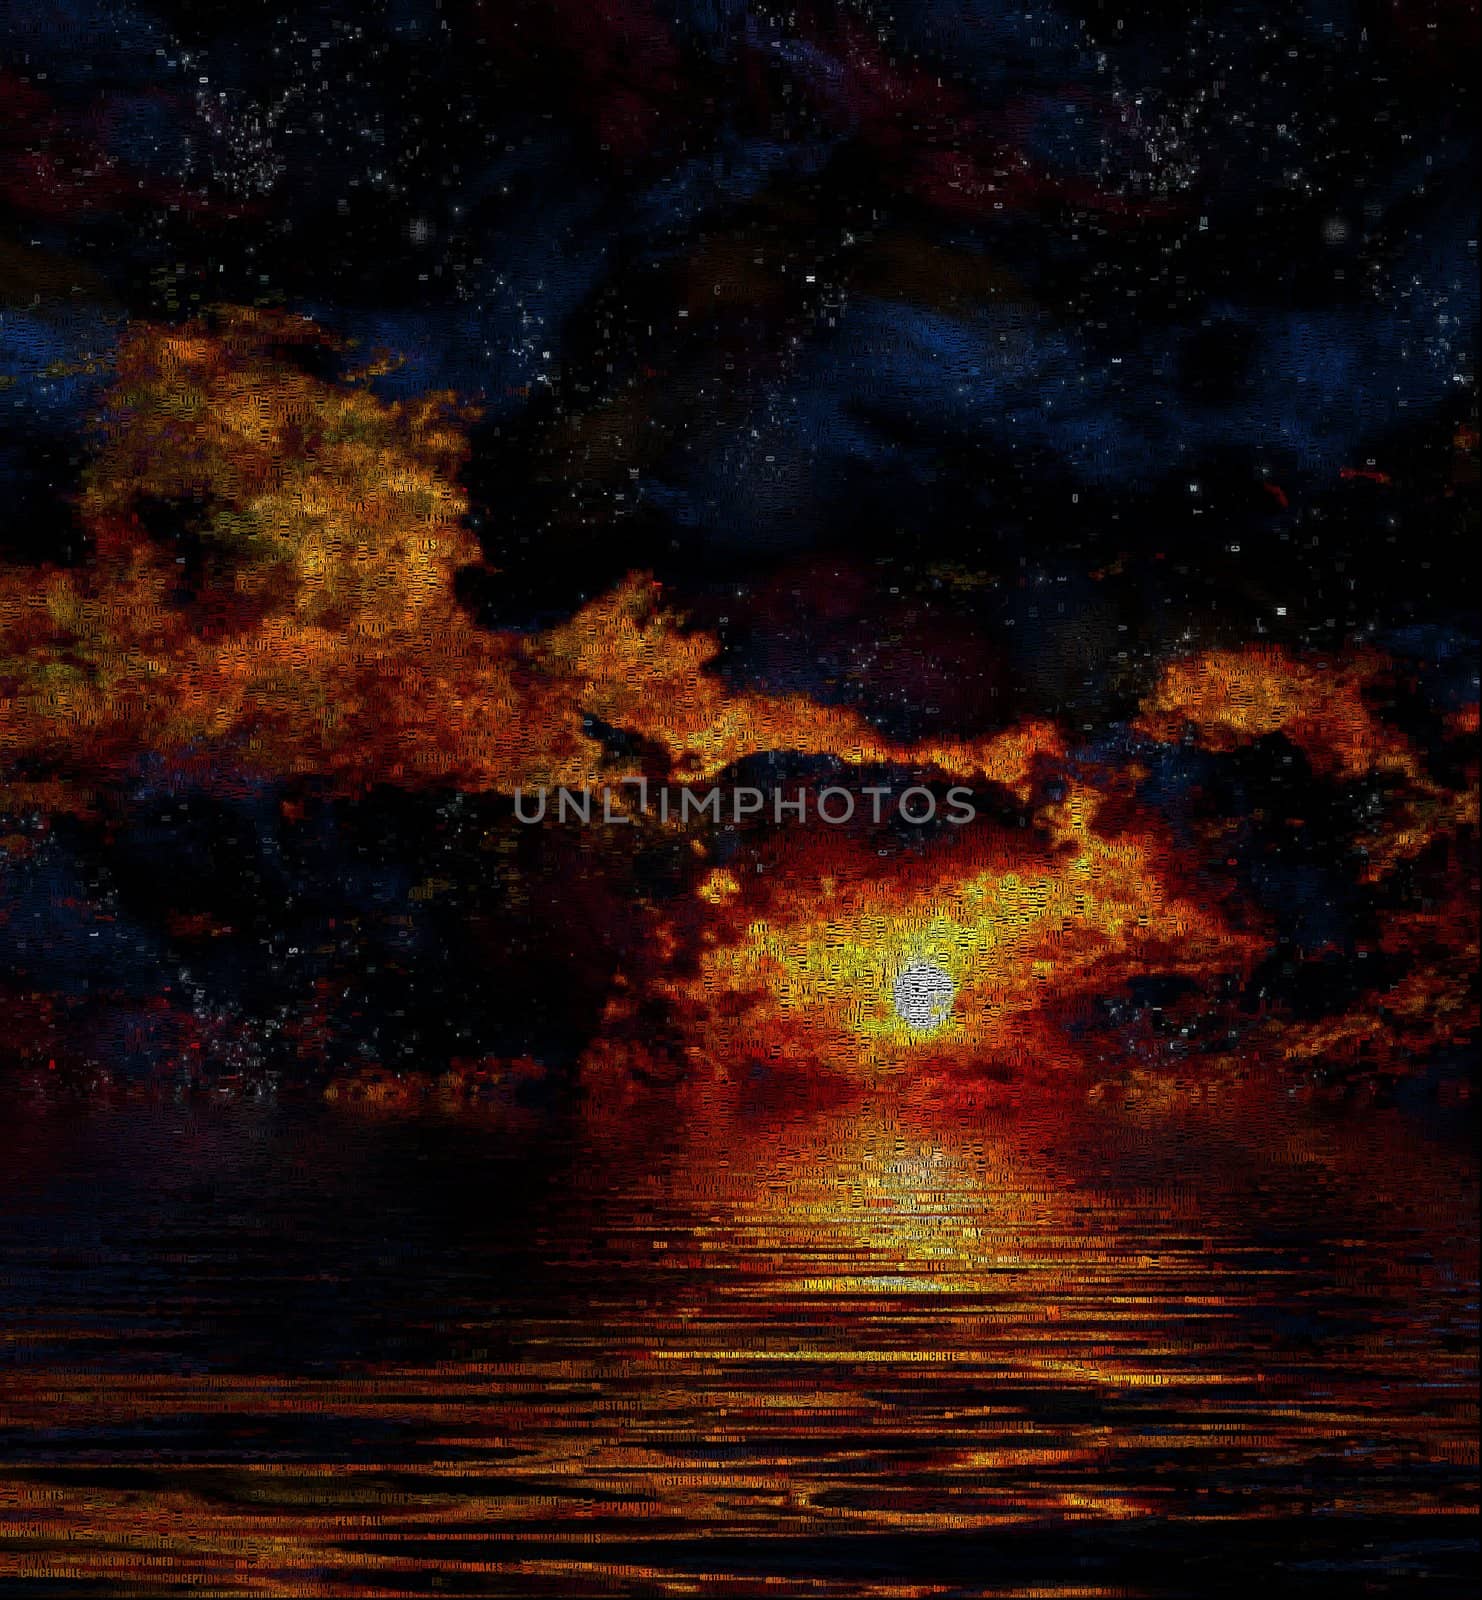 Red sunset above water. Image composed entirely of words